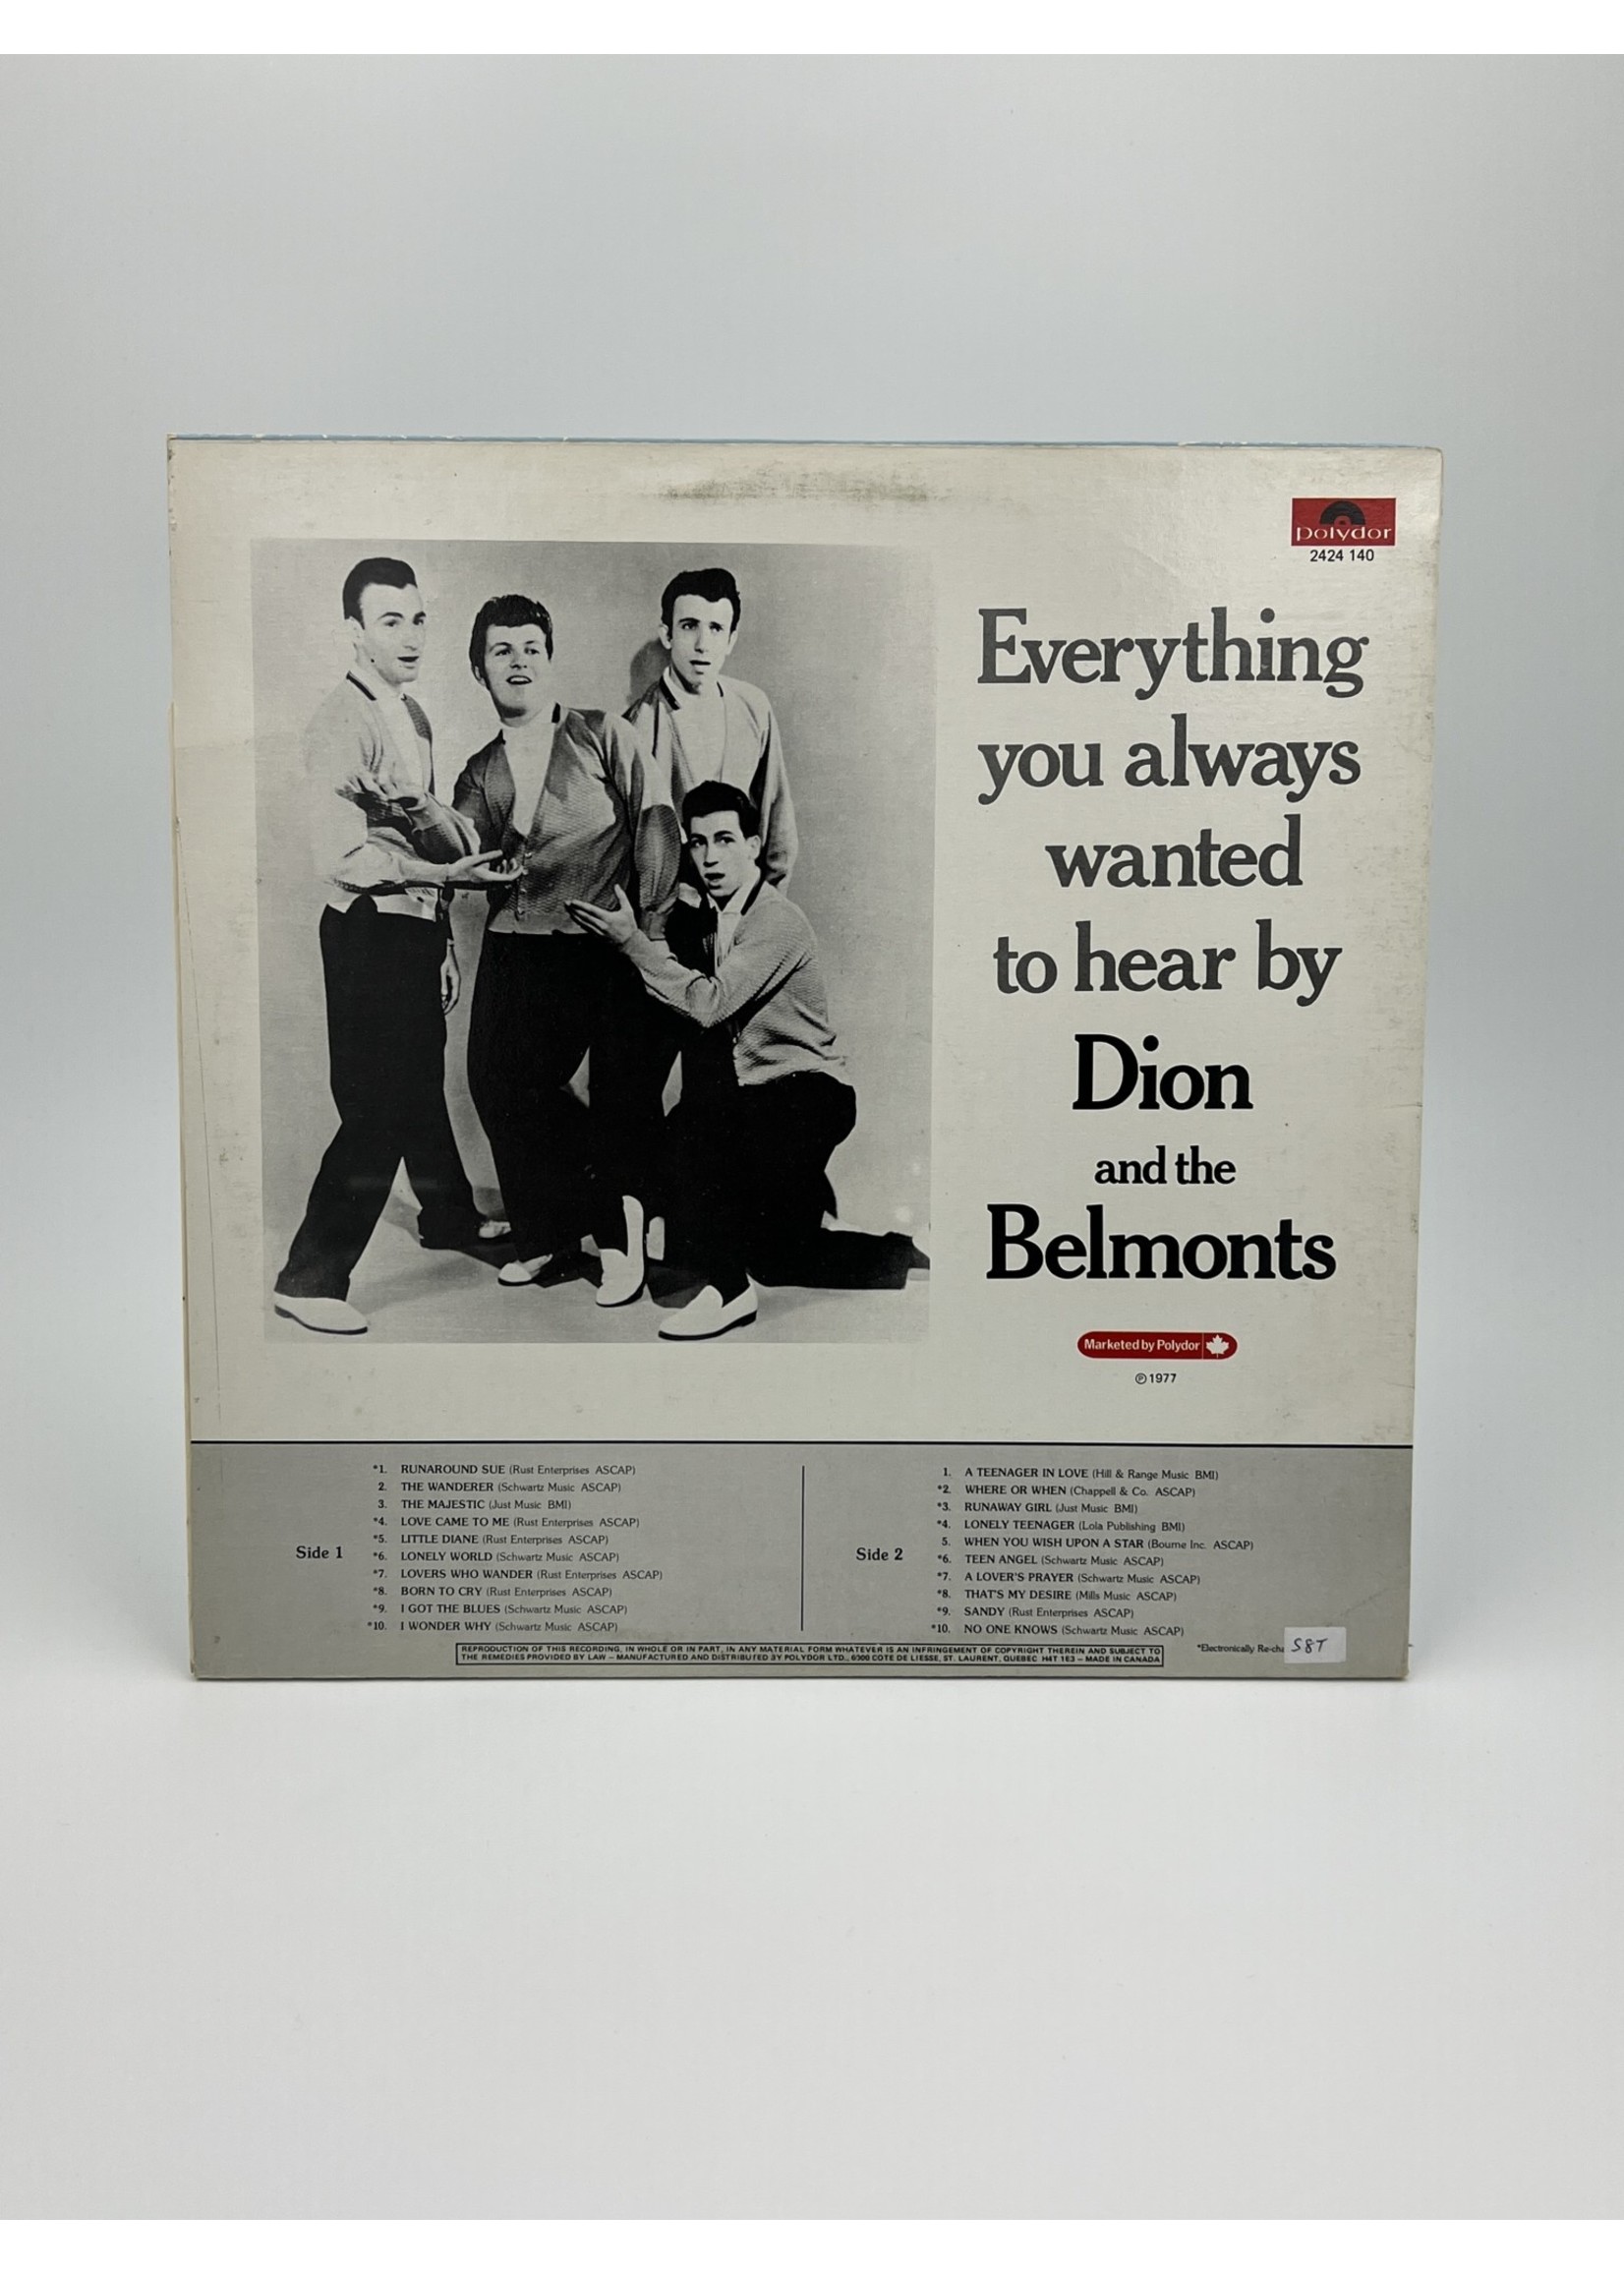 LP Dion and the Belmonts Everything you always wanted to Hear LP Record